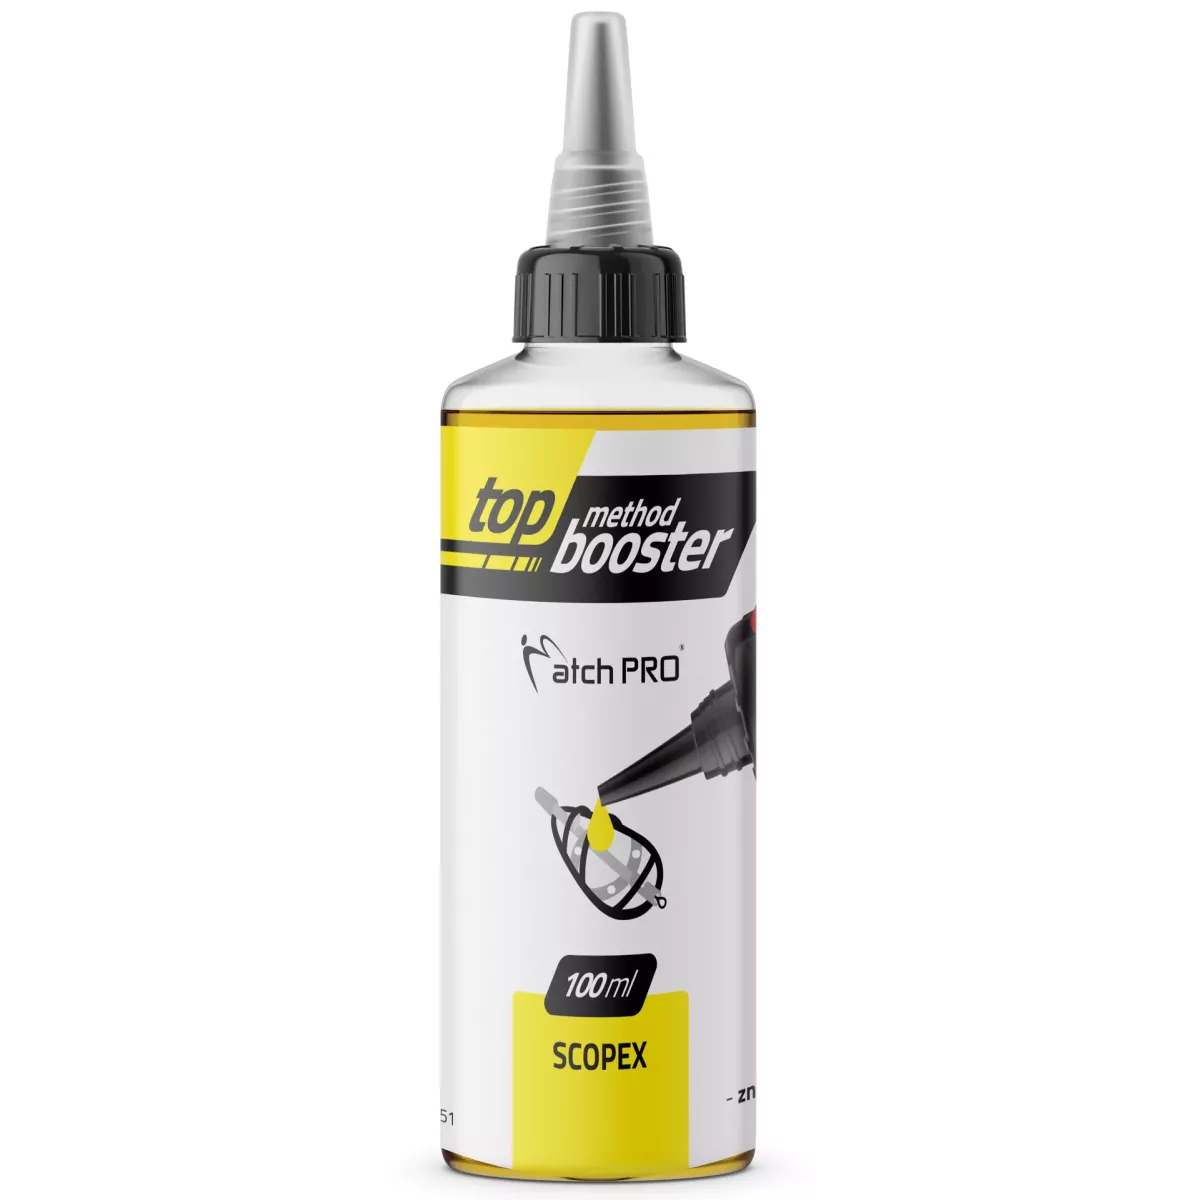 Booster MatchPro TOP Method Booster 100ml - SCOPEX